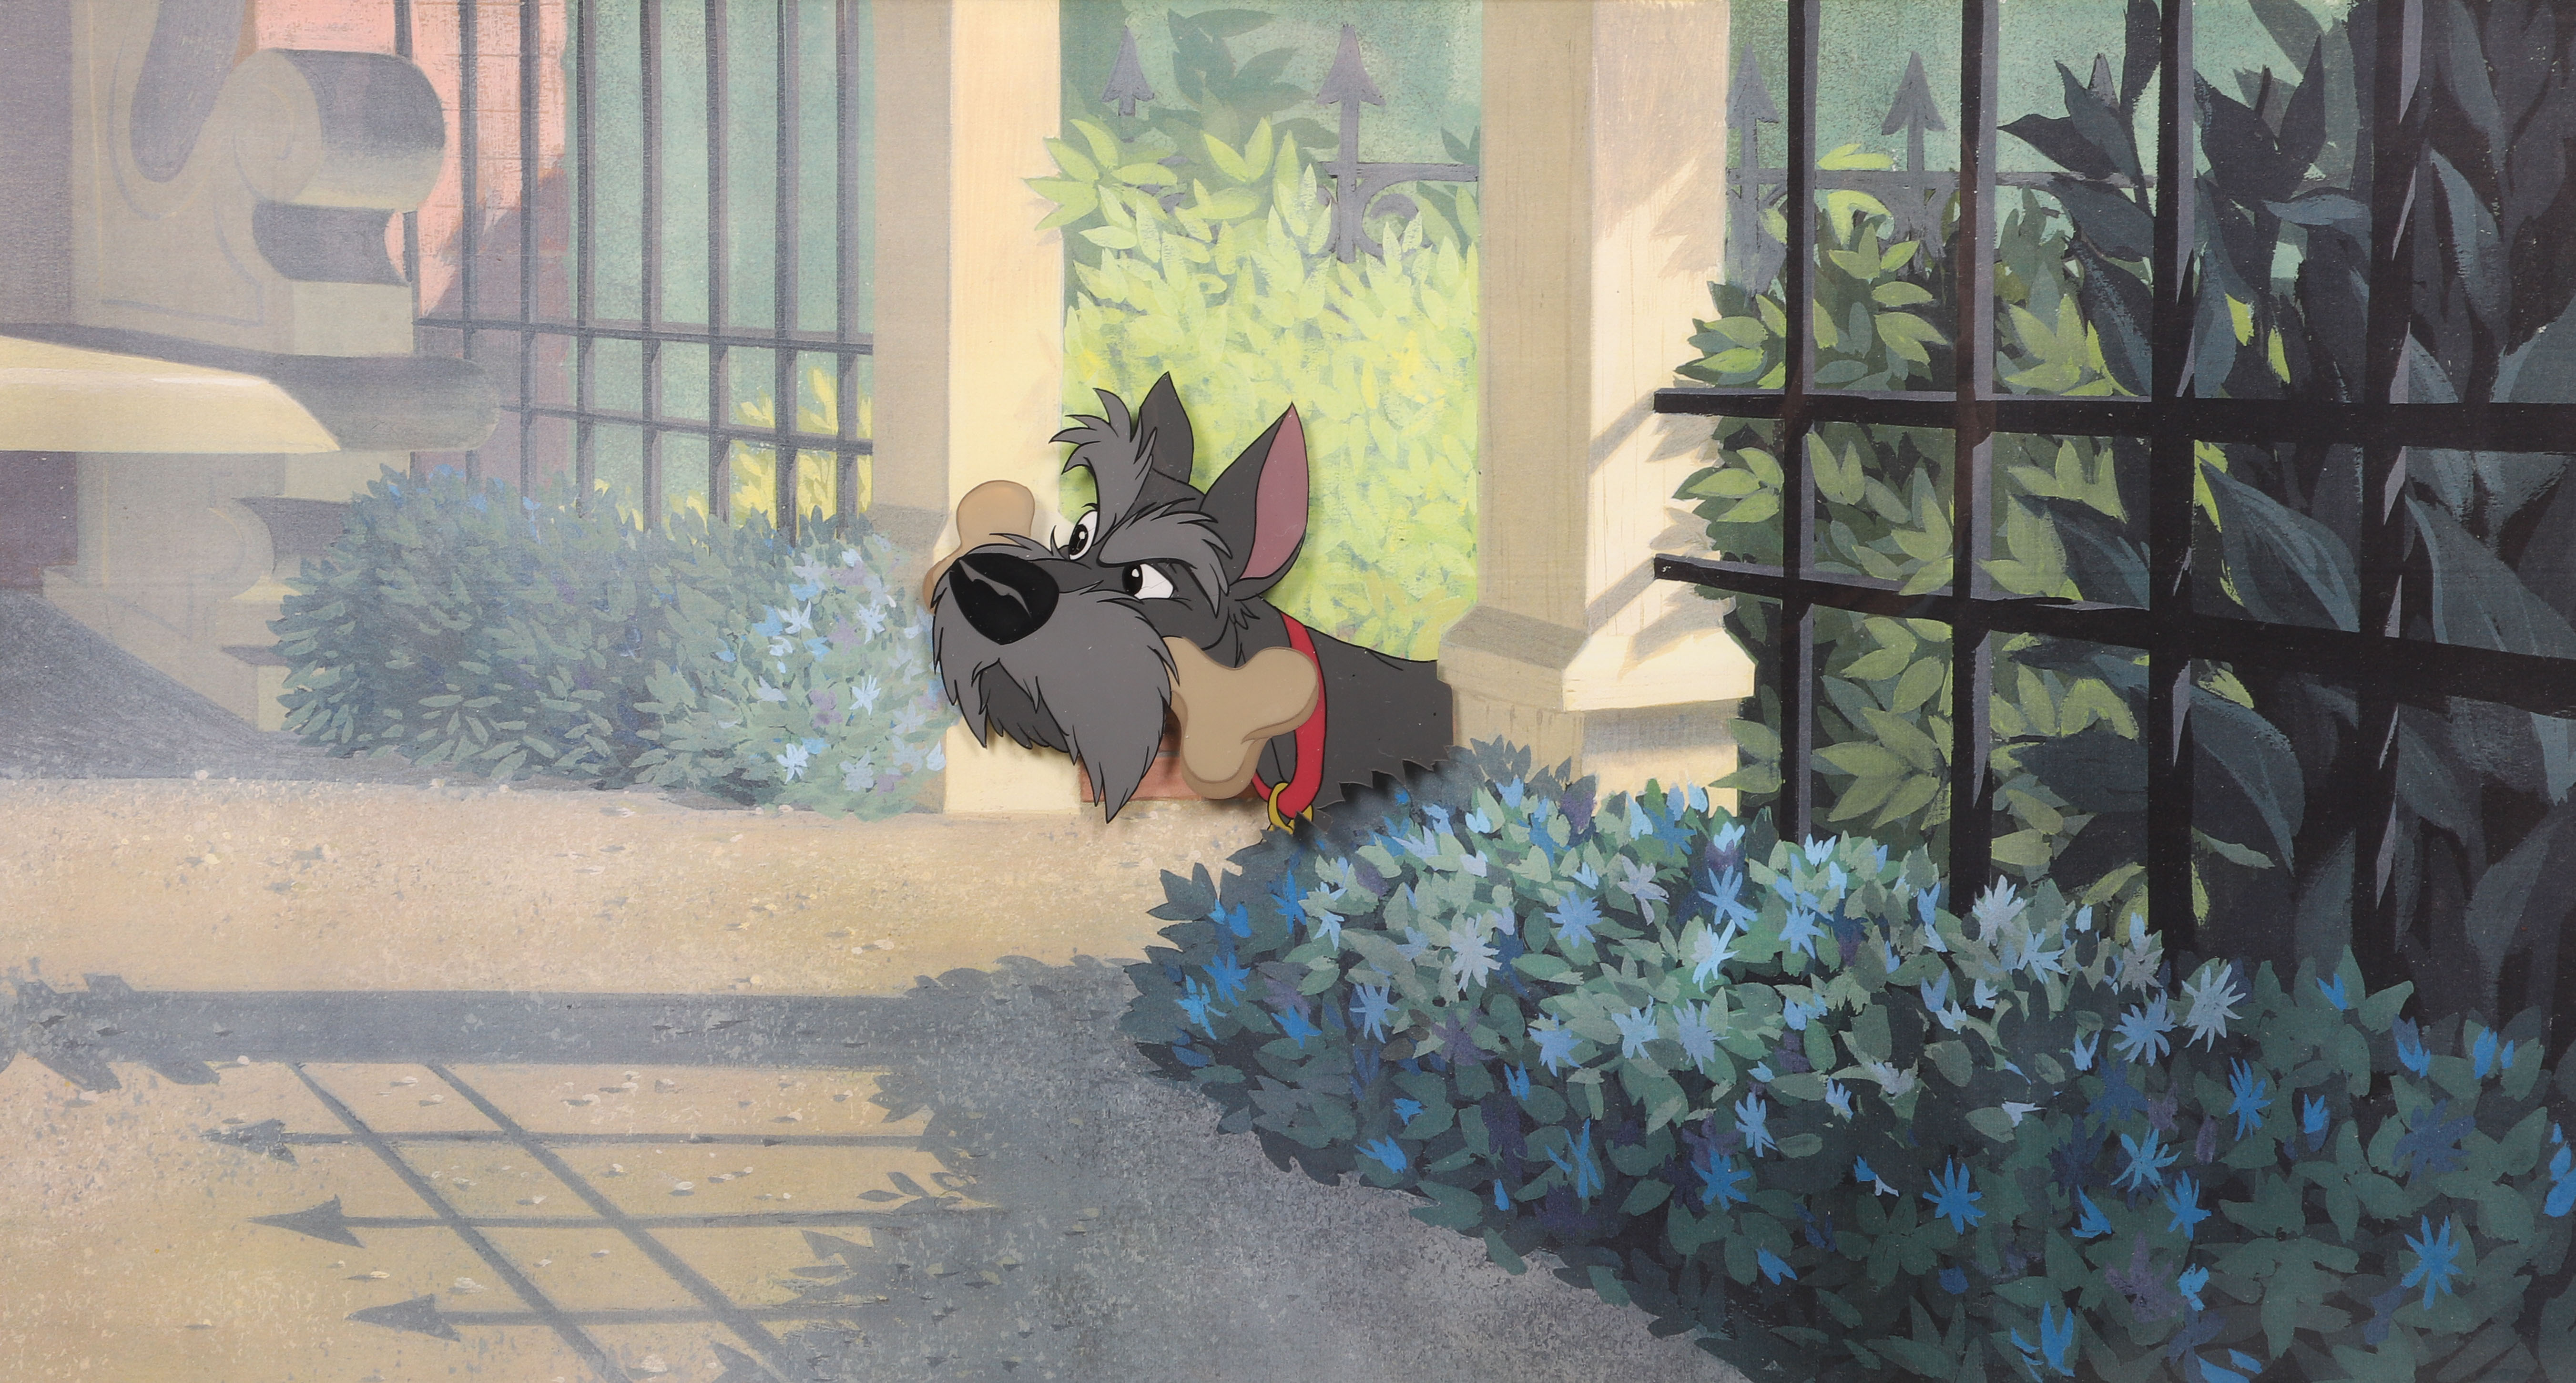 Lady and the Tramp production cel 2e1cb6